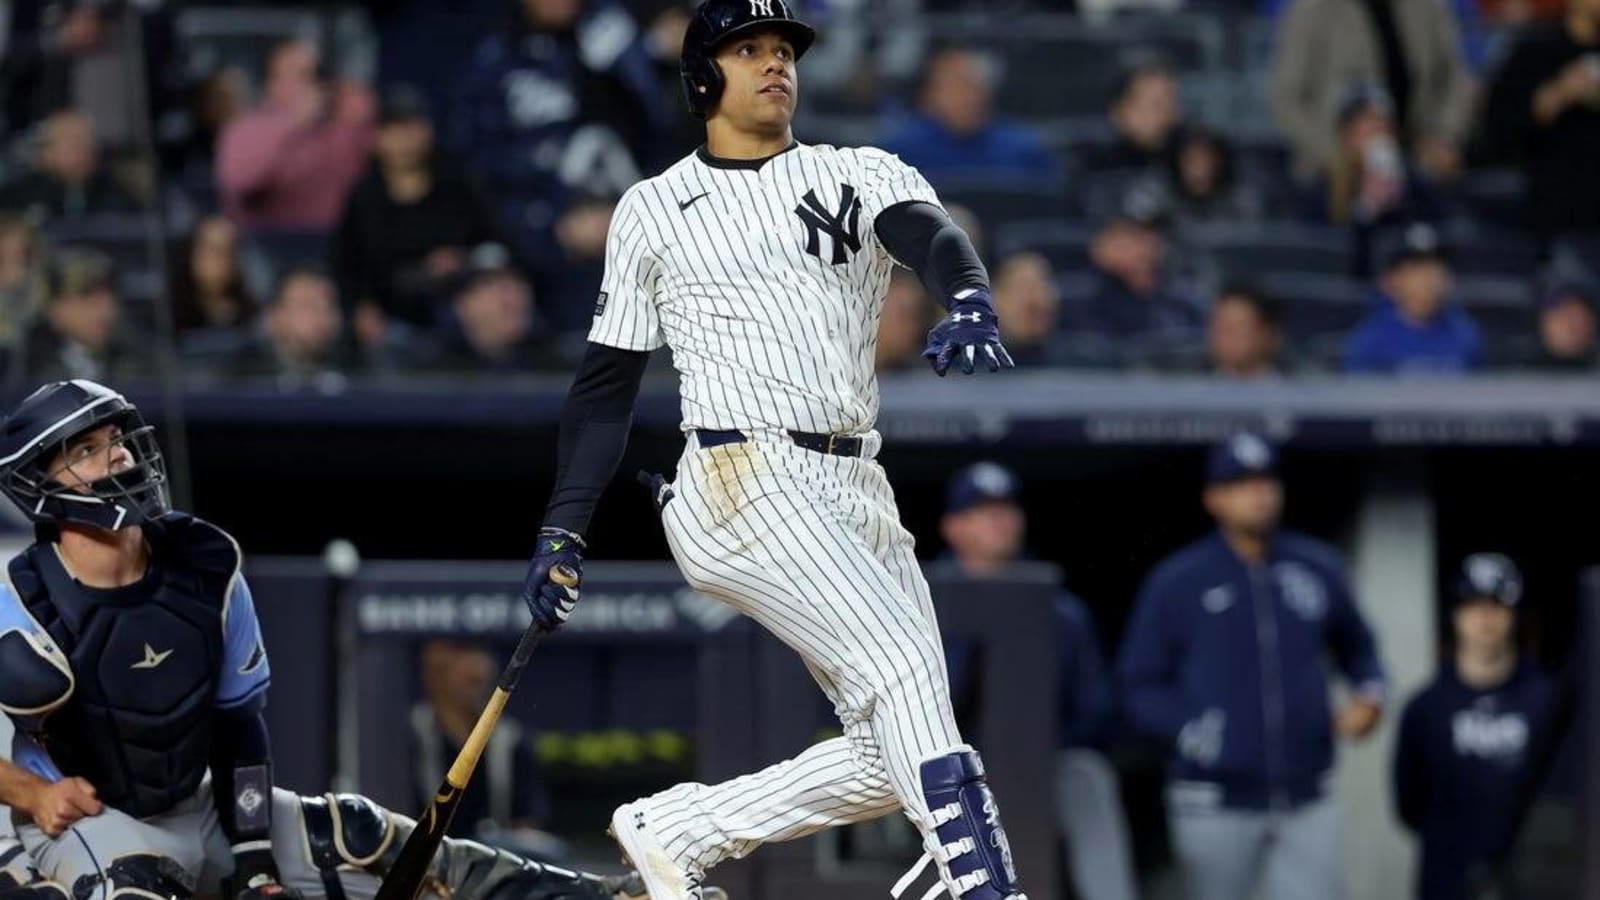 Yankees ride 5-run inning to victory over Rays